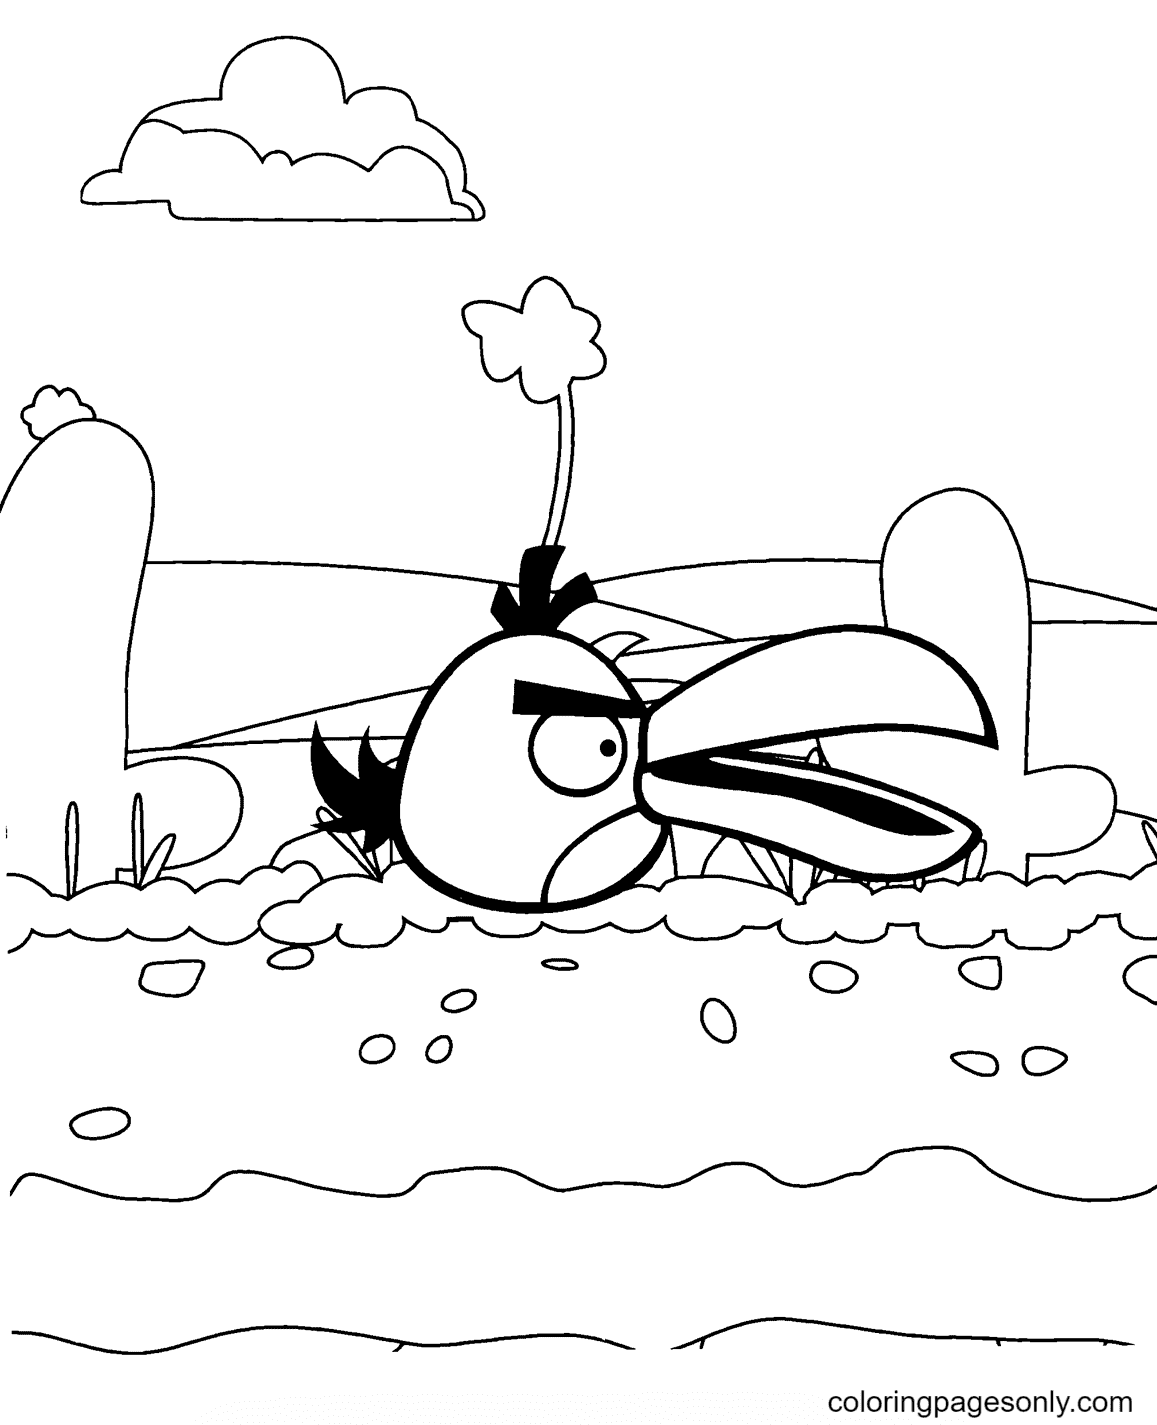 Hal Bird in Desert Coloring Page